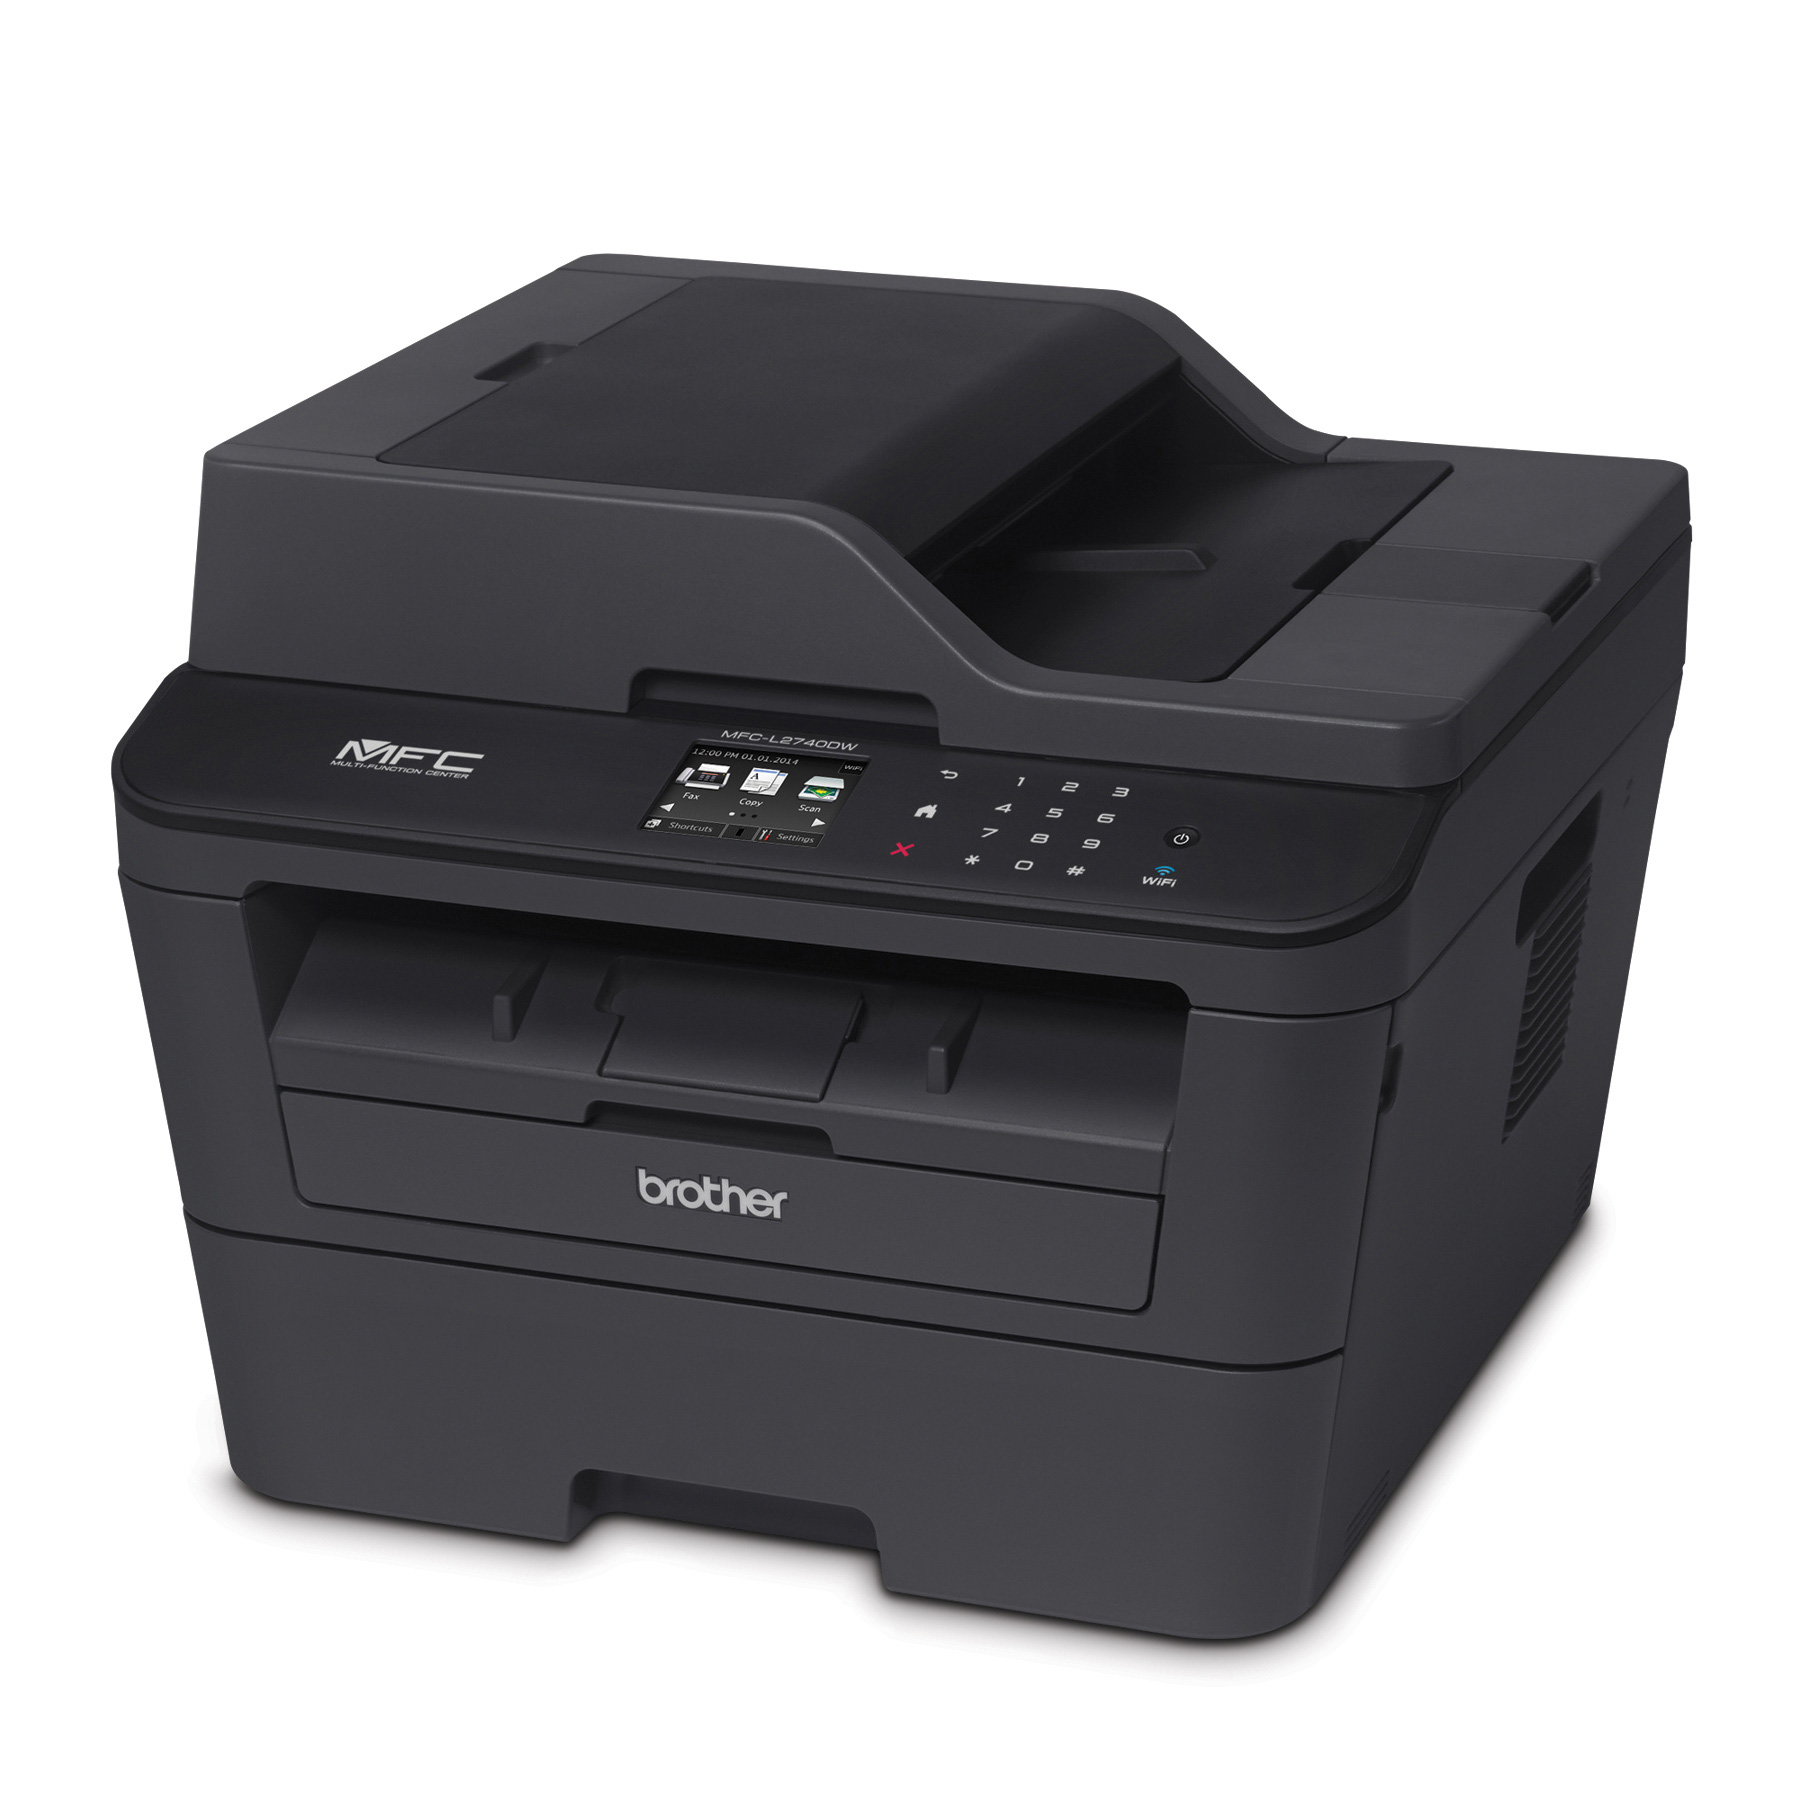 Brother MFC-L2740DW All-in-One Monochrome Laser Printer